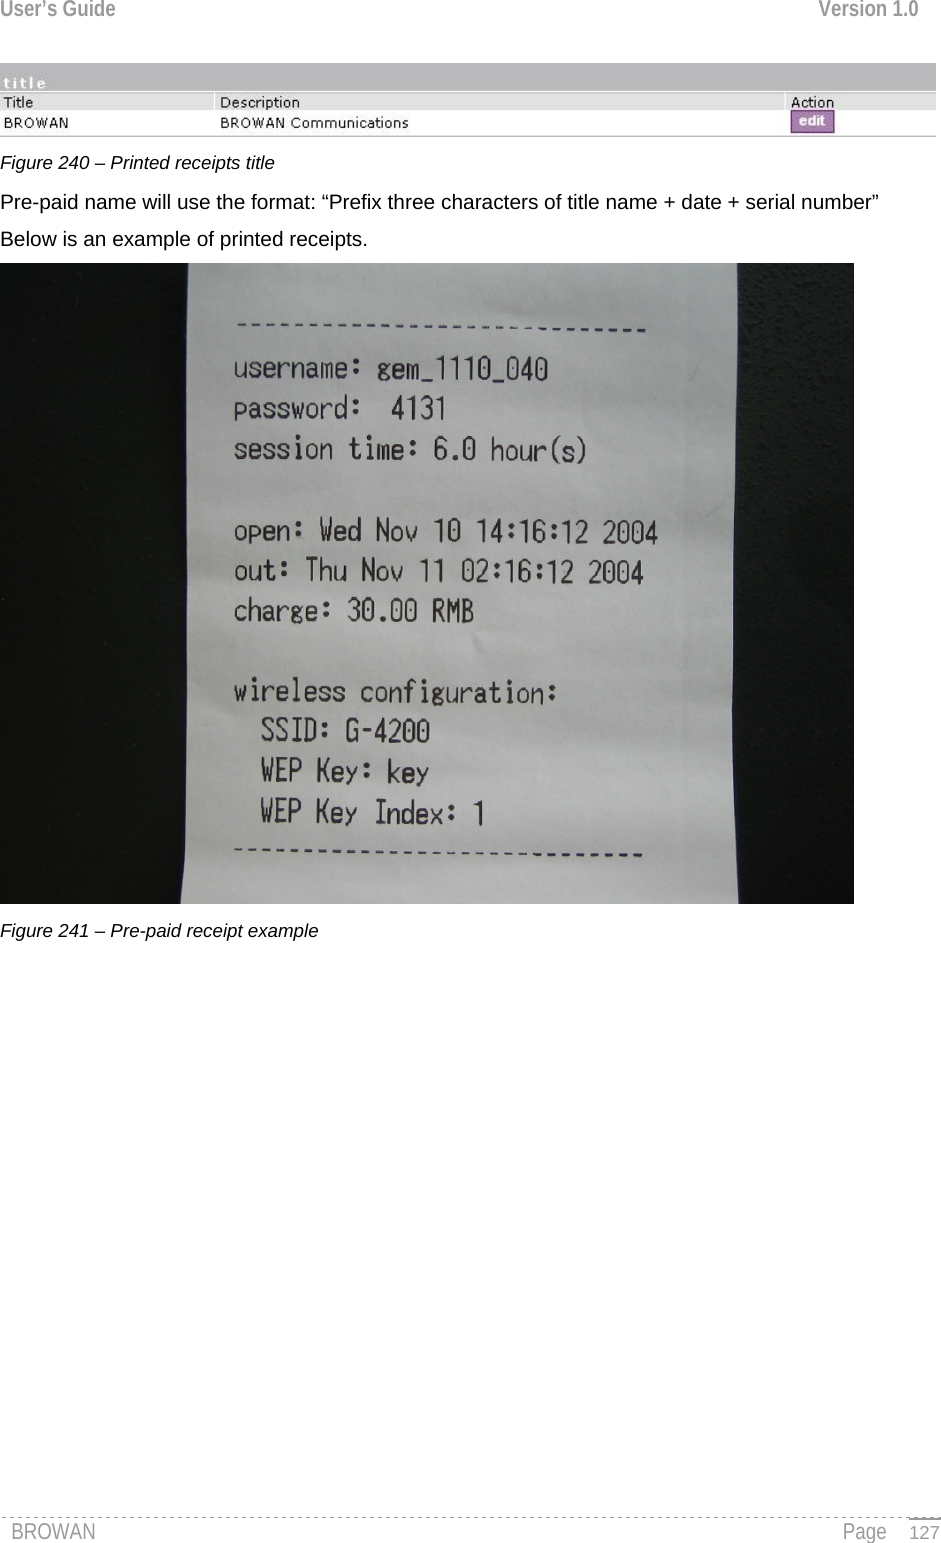 User’s Guide  Version 1.0   Figure 240 – Printed receipts title Pre-paid name will use the format: “Prefix three characters of title name + date + serial number” Below is an example of printed receipts.  Figure 241 – Pre-paid receipt example               BROWAN                                                                                                                                               Page   127